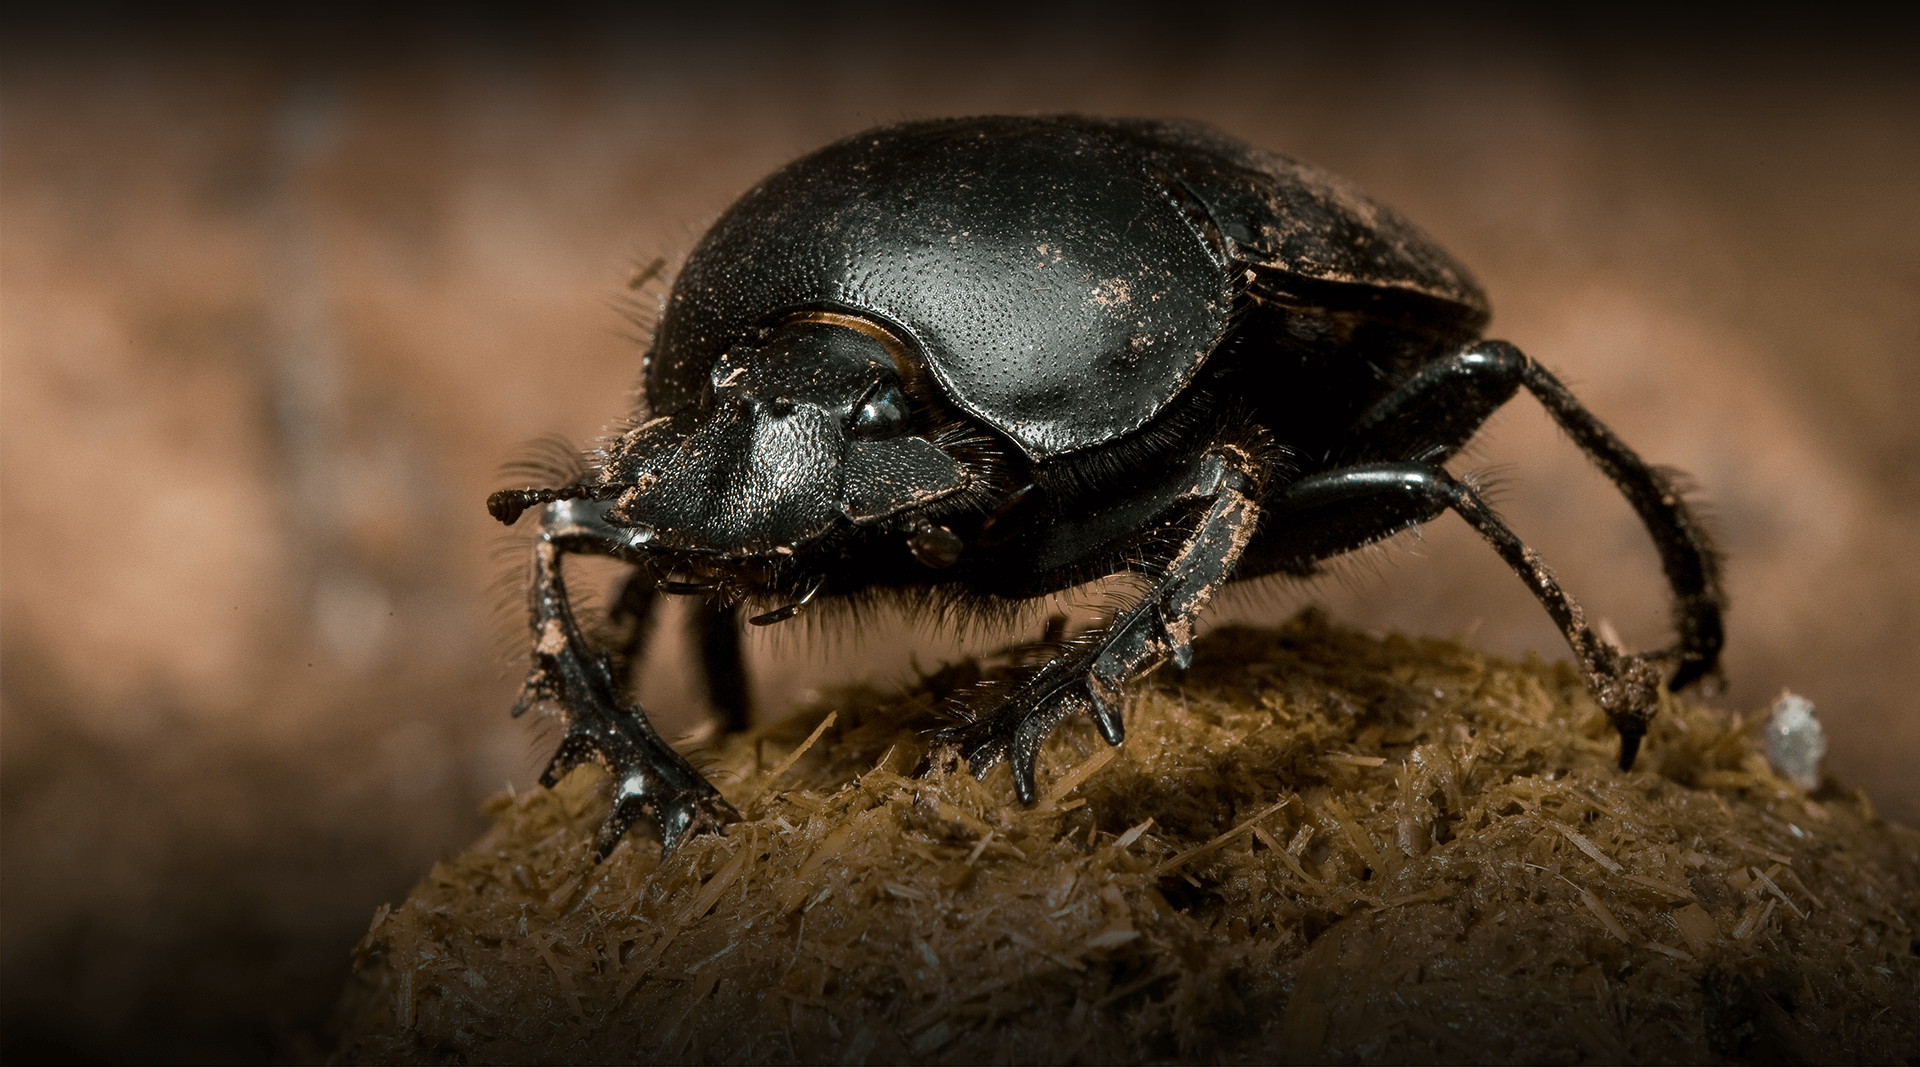 Dung beetle stands on a dung ball